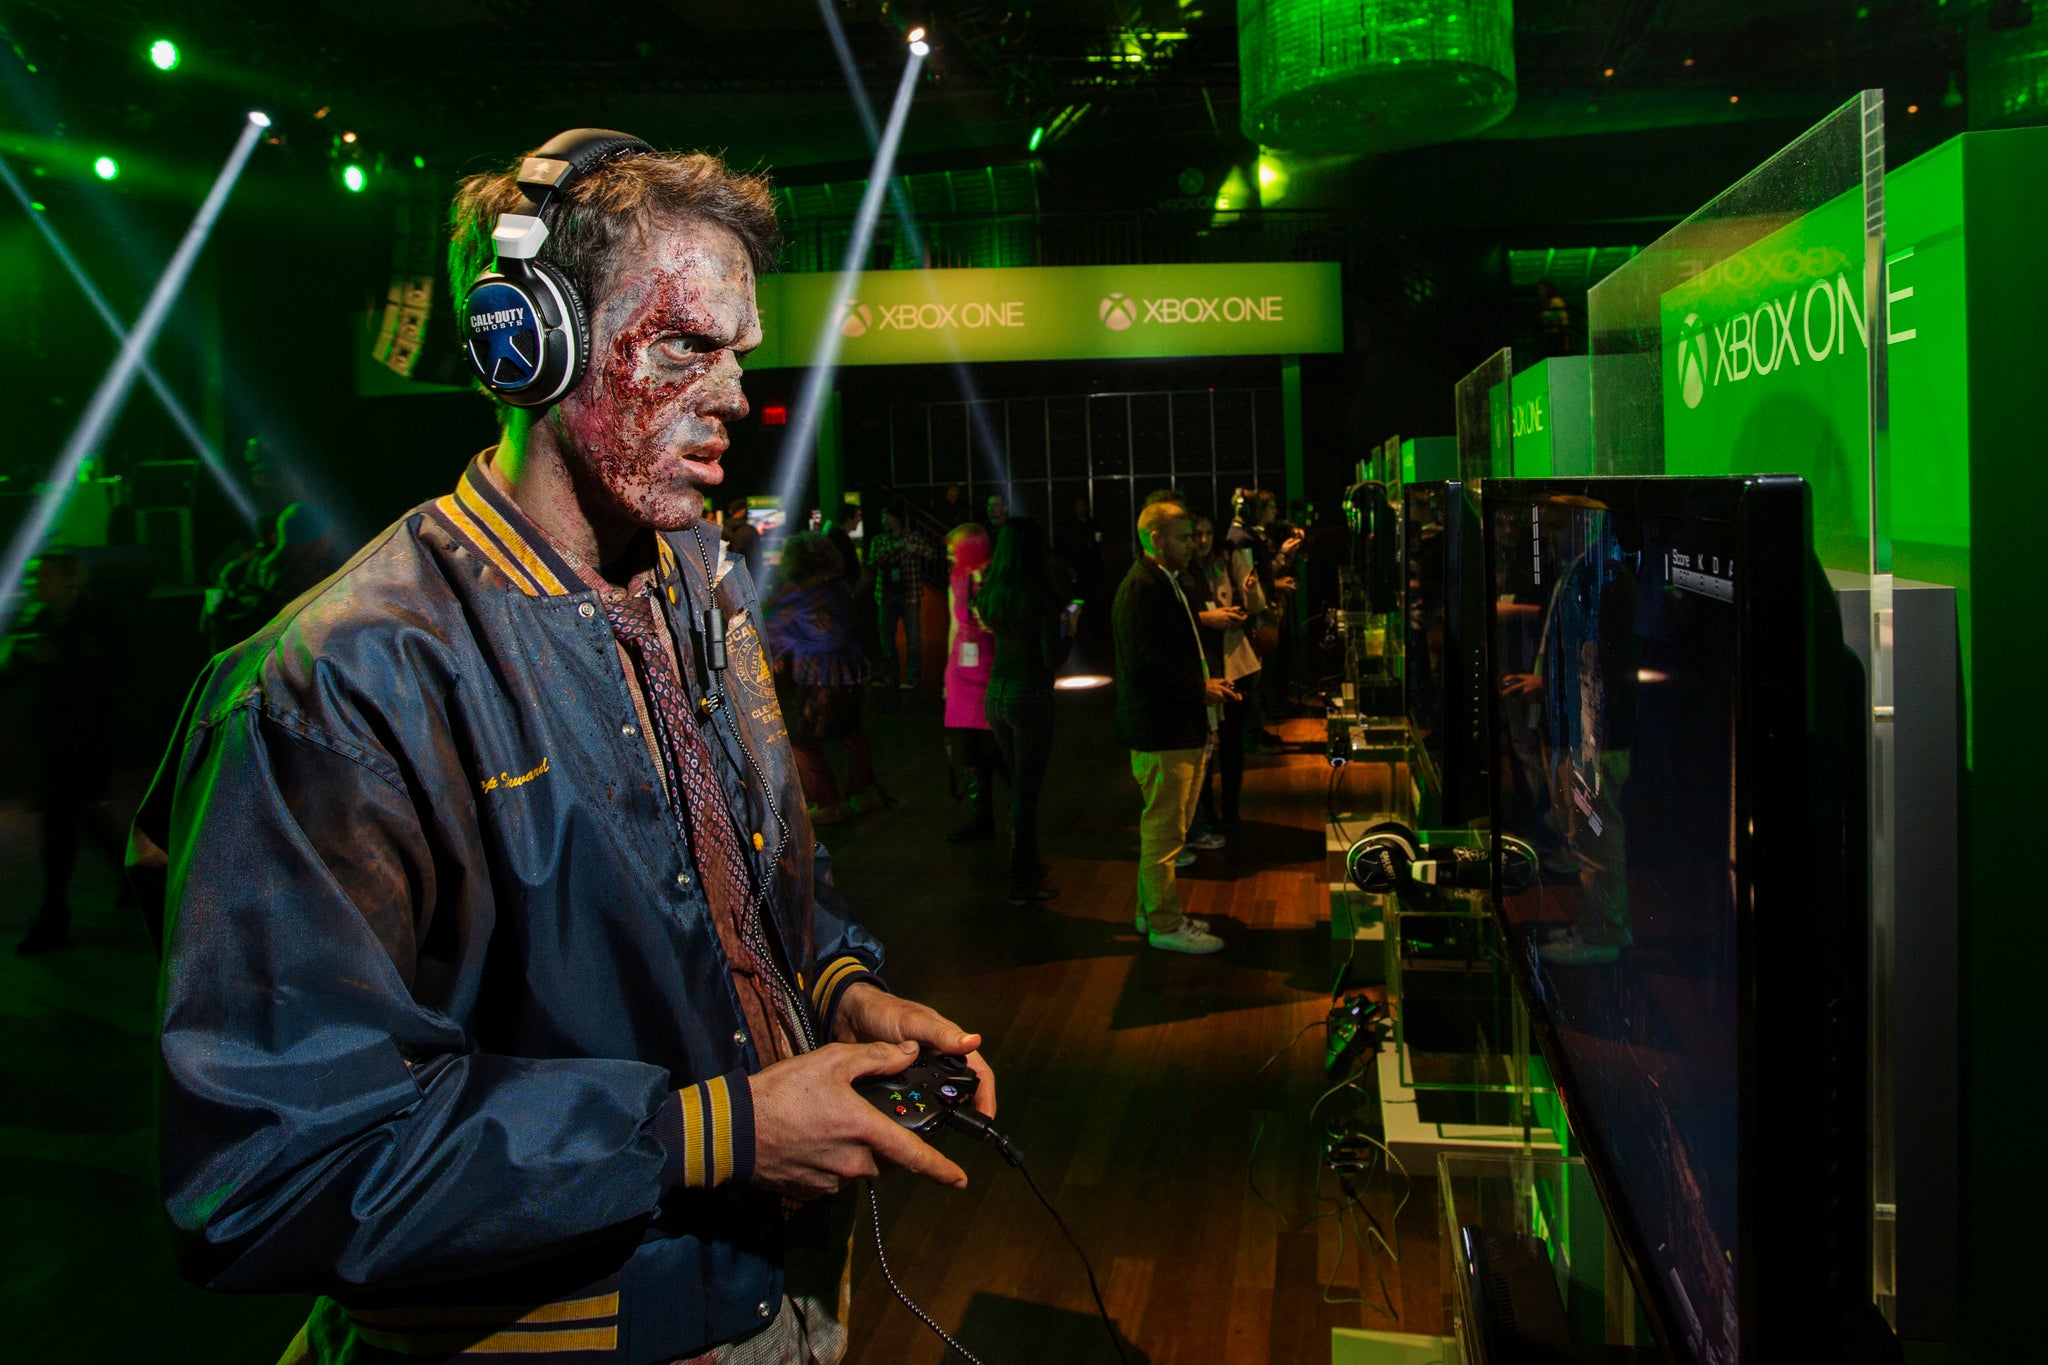 A man dressed as a zombie plays video games on an Xbox One console during a midnight launch event in New York.